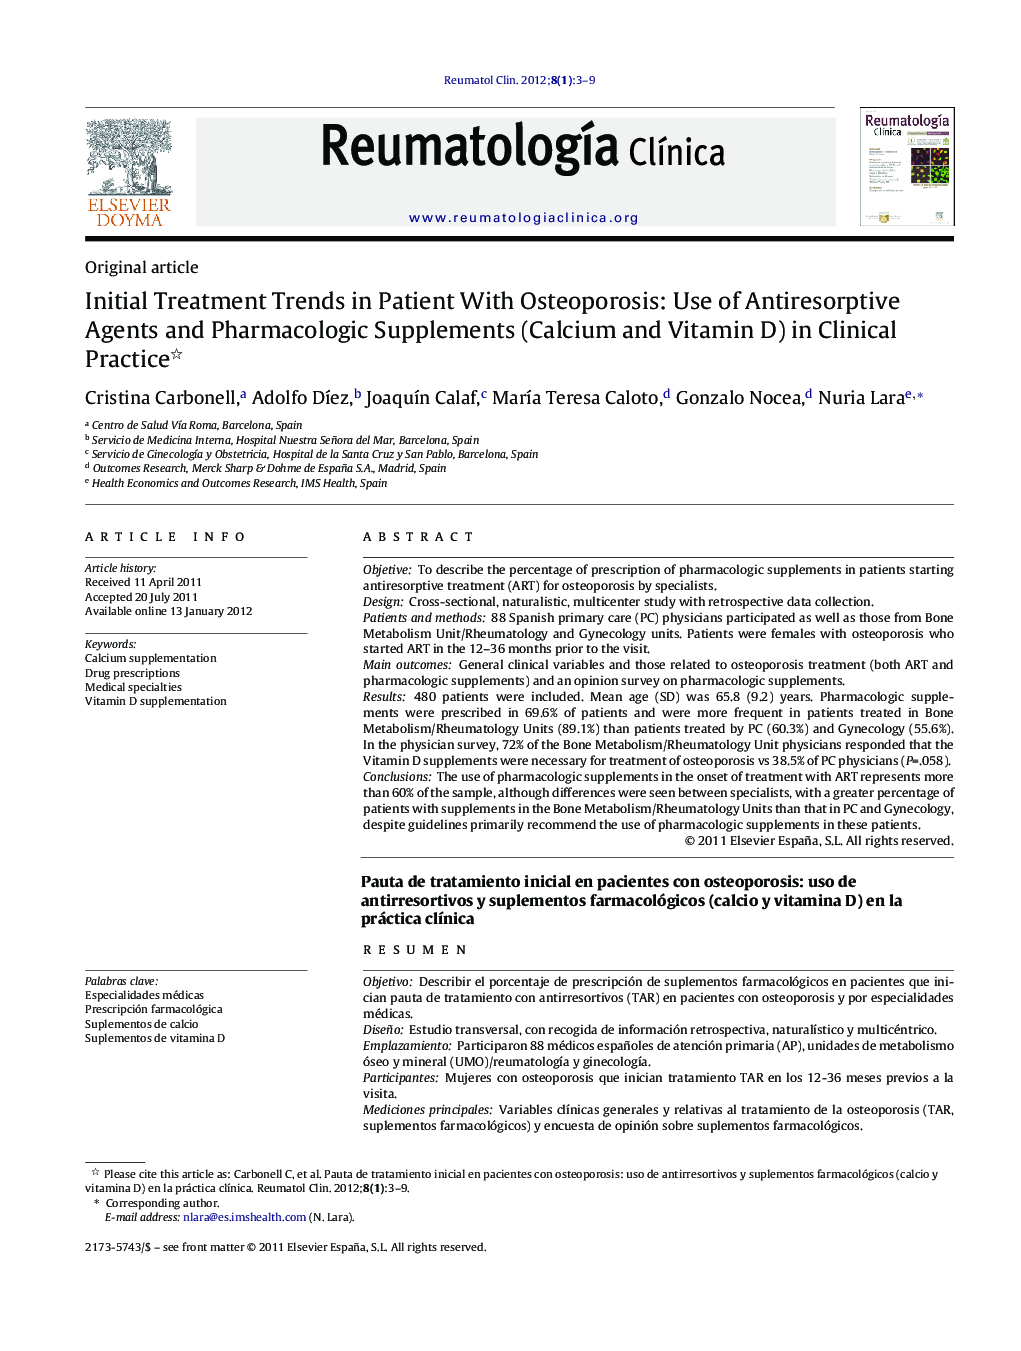 Initial Treatment Trends in Patient With Osteoporosis: Use of Antiresorptive Agents and Pharmacologic Supplements (Calcium and Vitamin D) in Clinical Practice